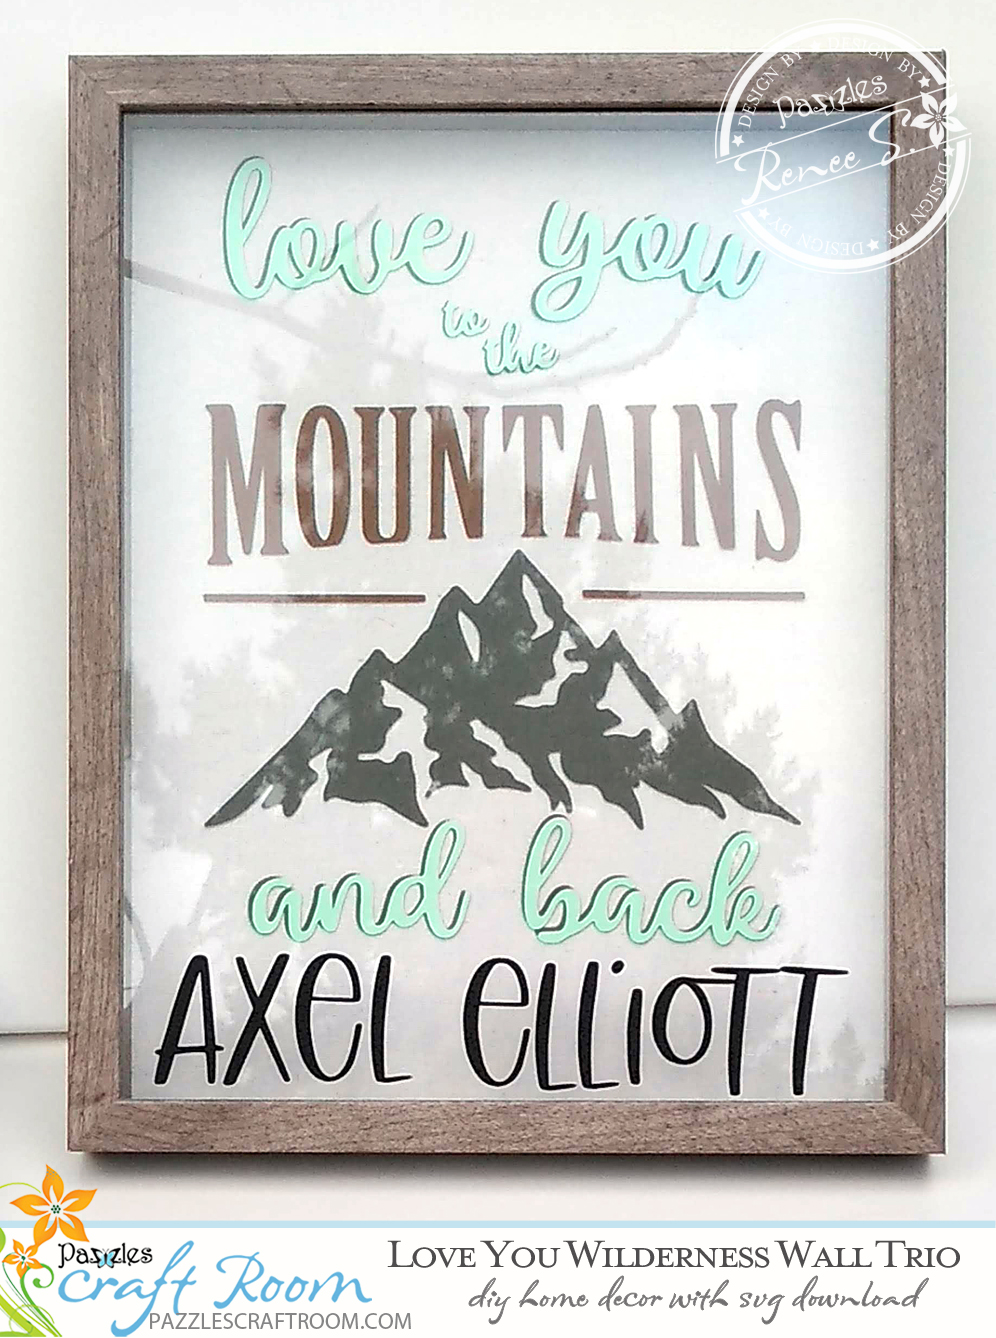 Pazzles DIY Wilderness Wall Trio for nursery with instant SVG download. Compatible with all major electronic cutters including Pazzles Inspiration, Cricut, and Silhouette Cameo. Design by Renee Smart.